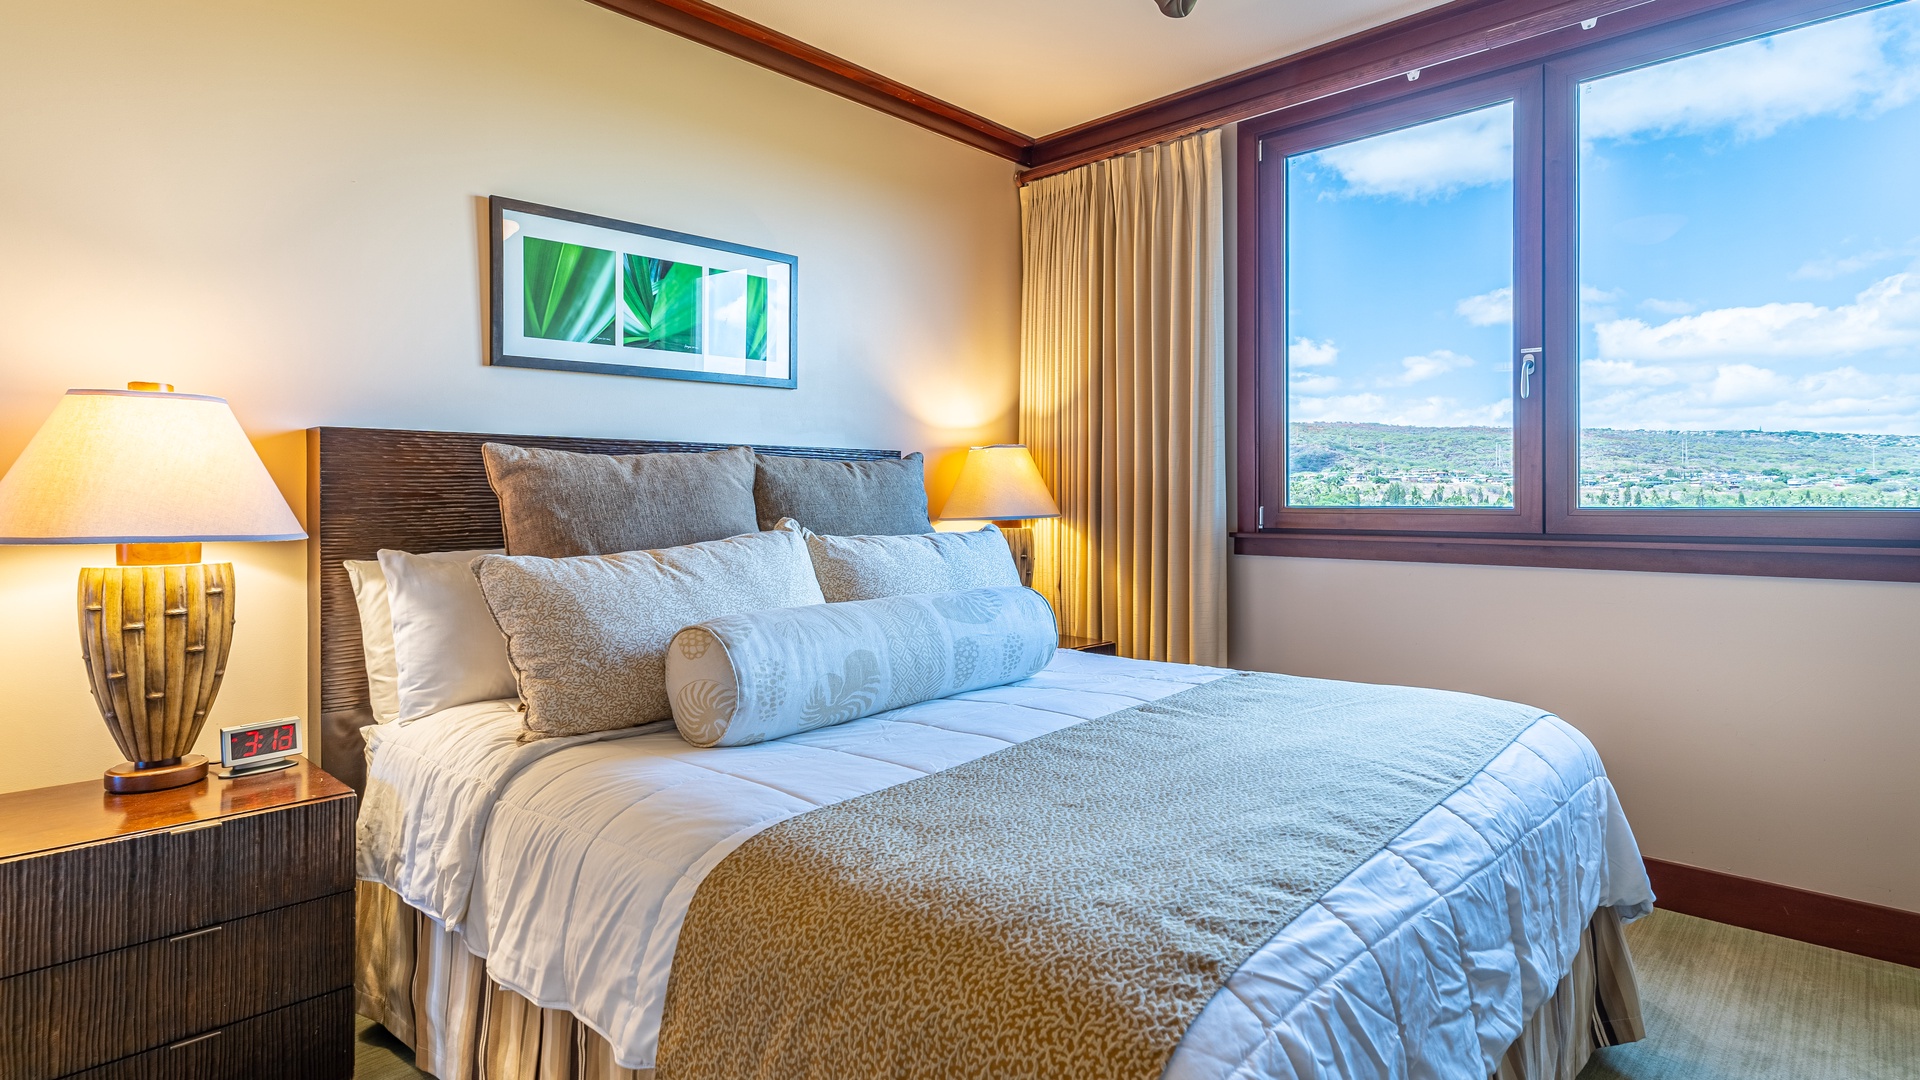 Kapolei Vacation Rentals, Ko Olina Beach Villas O704 - Welcome to the comfortable and stylish primary guest bedroom with views.